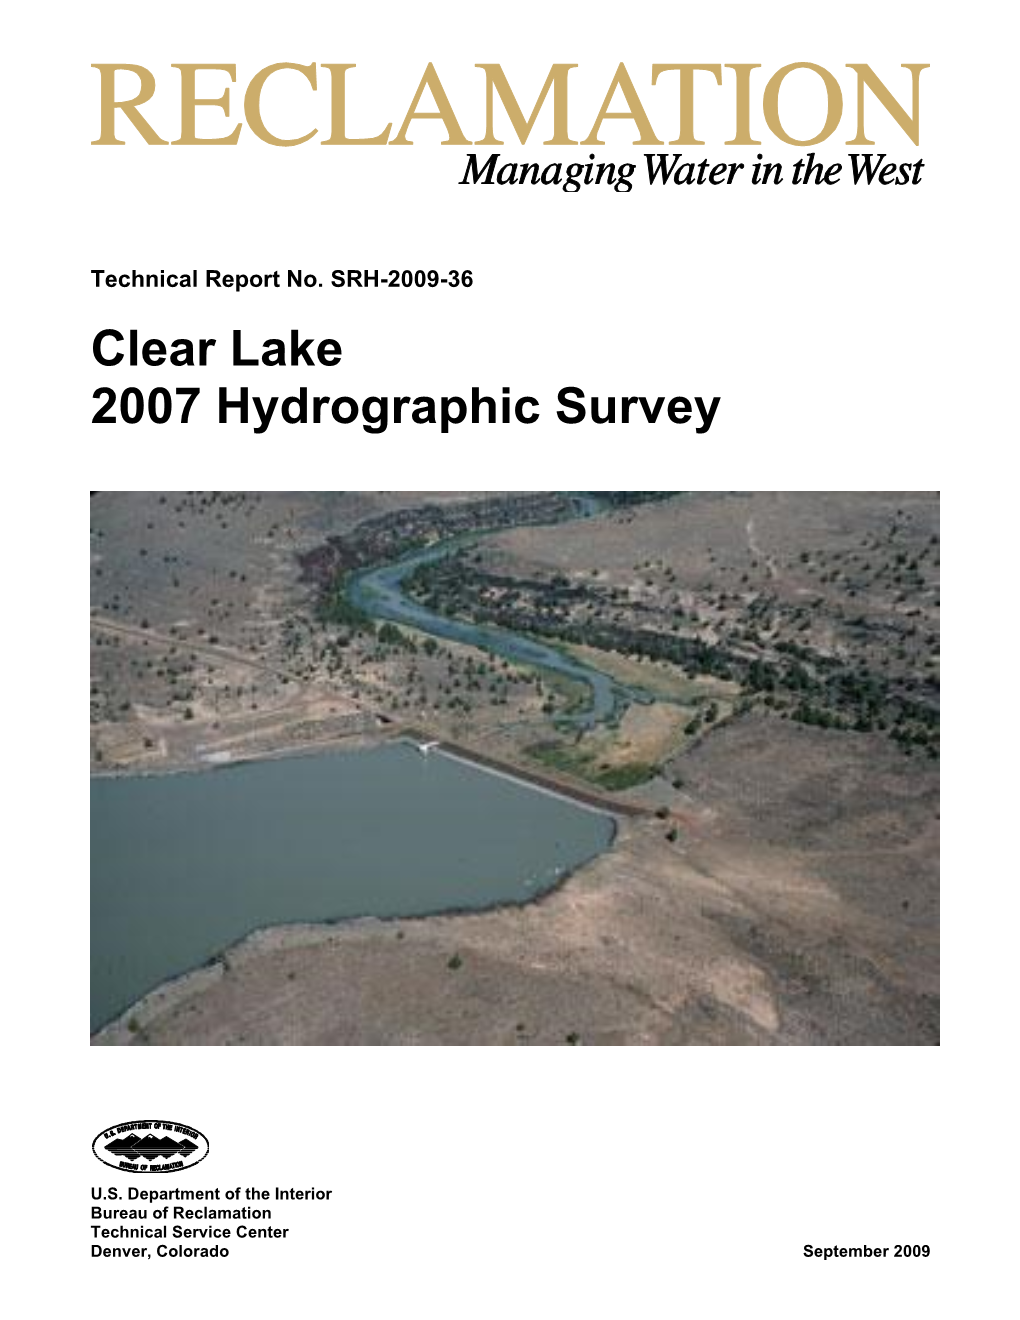 Clear Lake 2007 Hydrographic Survey